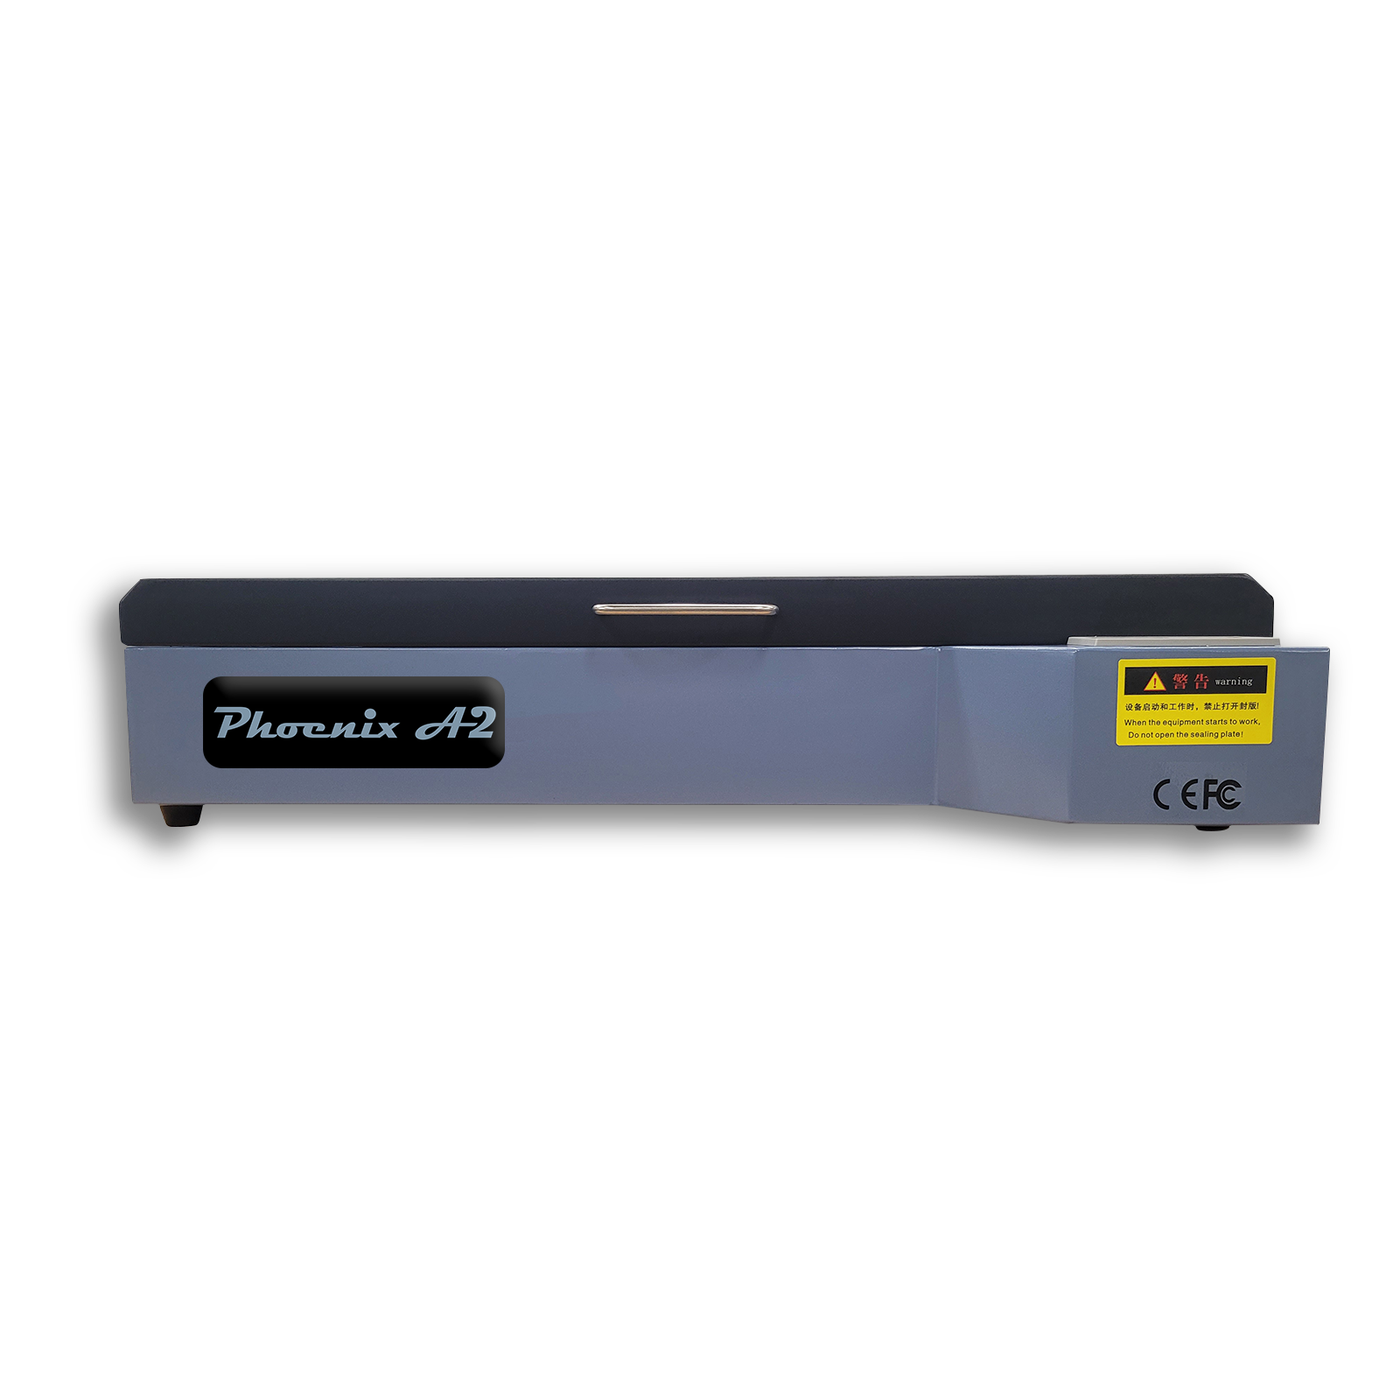 Phoenix A2 DTF Curing Oven - 15" x 24"